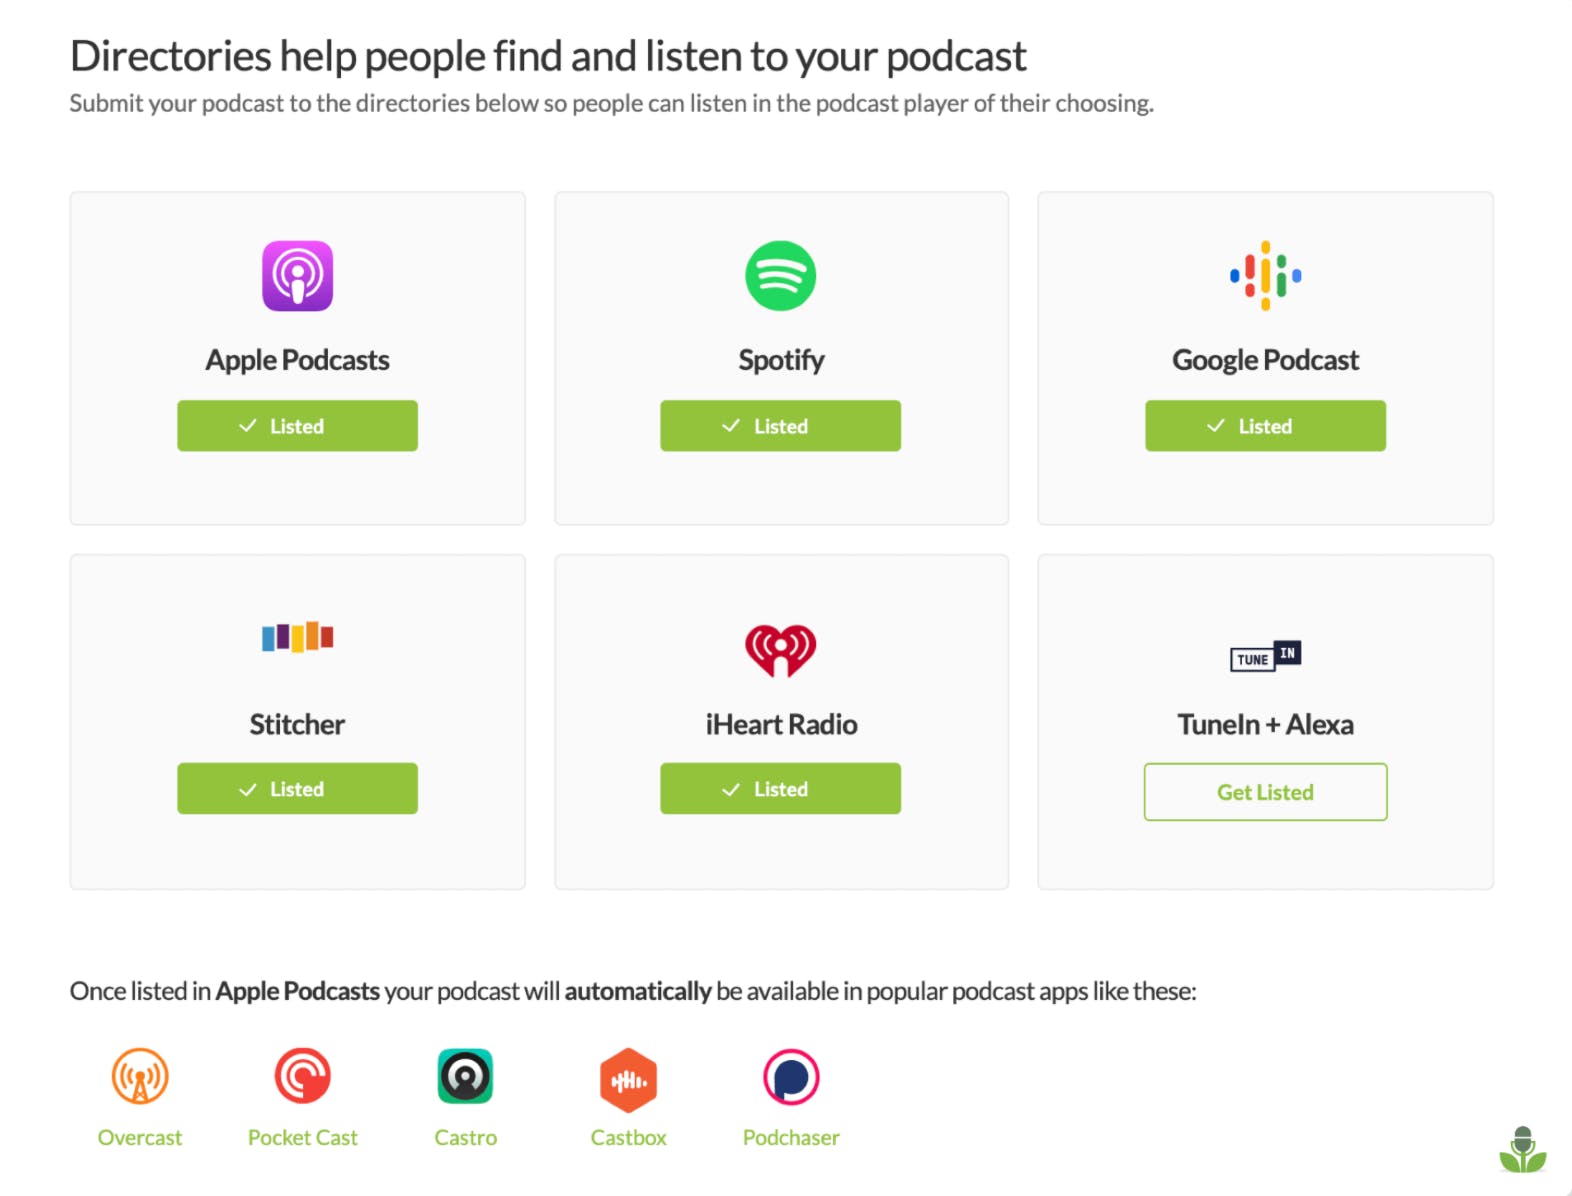 Podcast directories in Buzzsprout